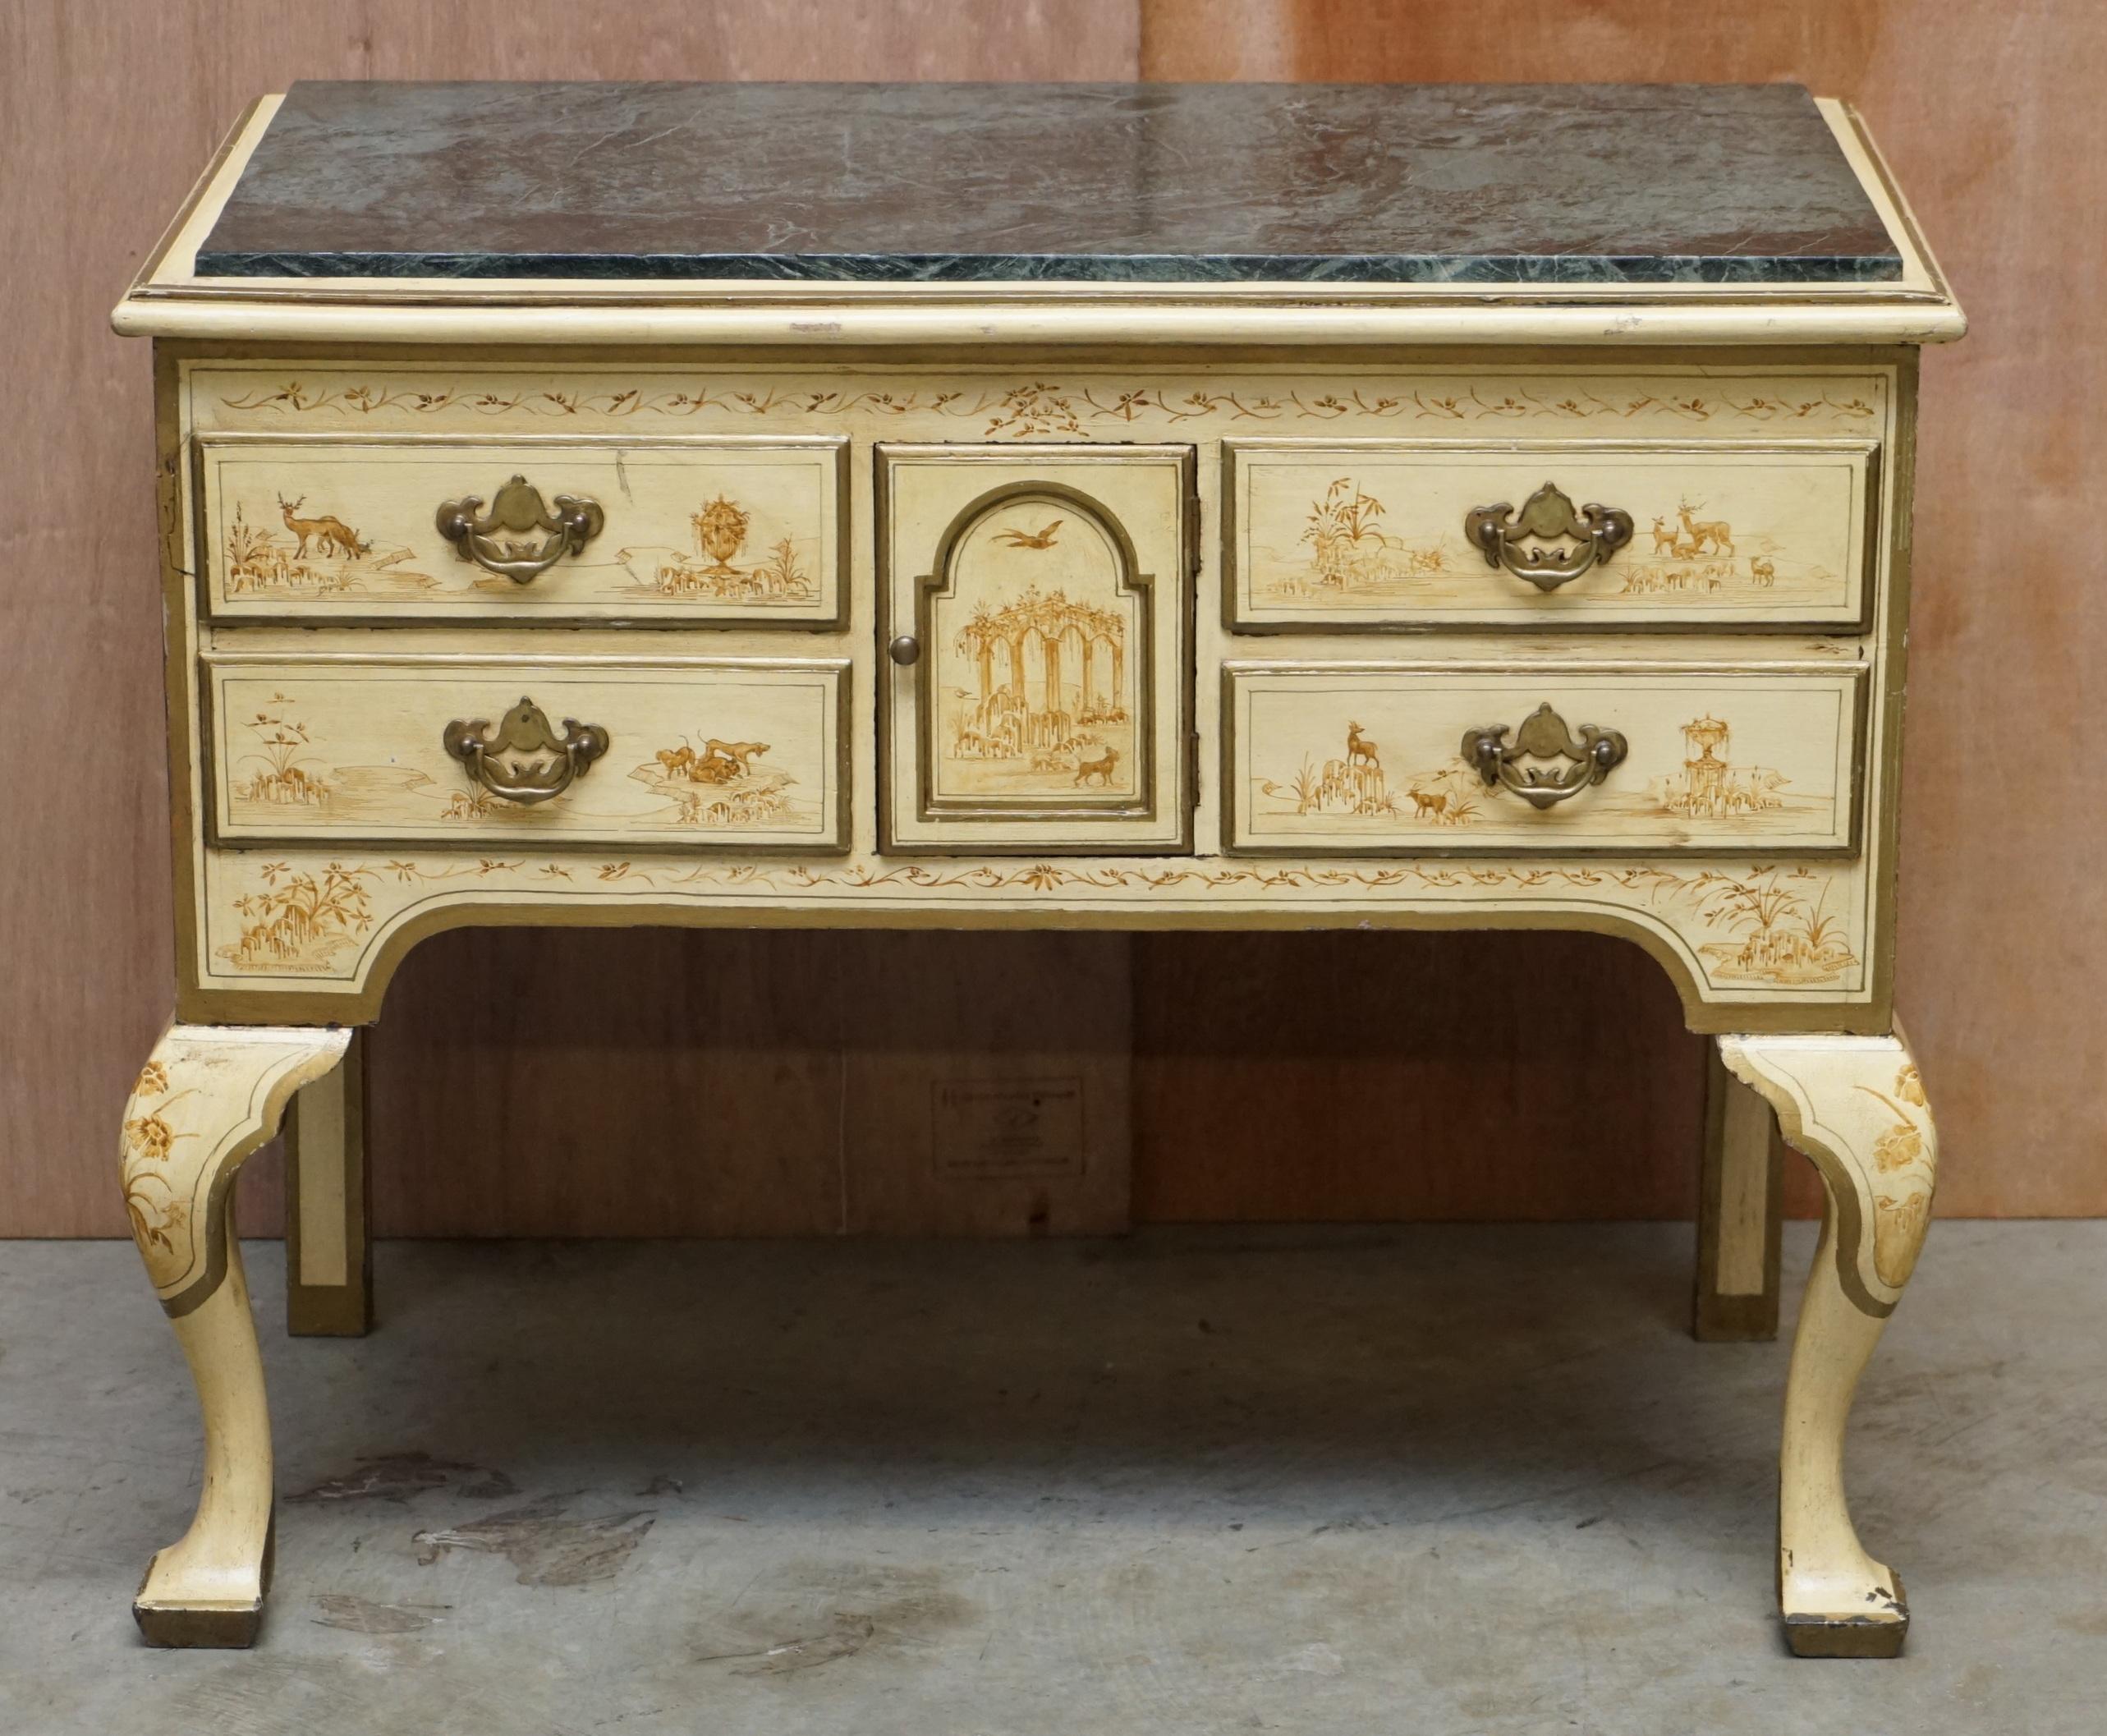 We are delighted to offer this stunning hand painted marble topped Chinoiserie Chinese Chippendale taste sideboard 

A very good looking and decorative sideboard, its hand painted with rural scenes depicting animals and what looks like Roman